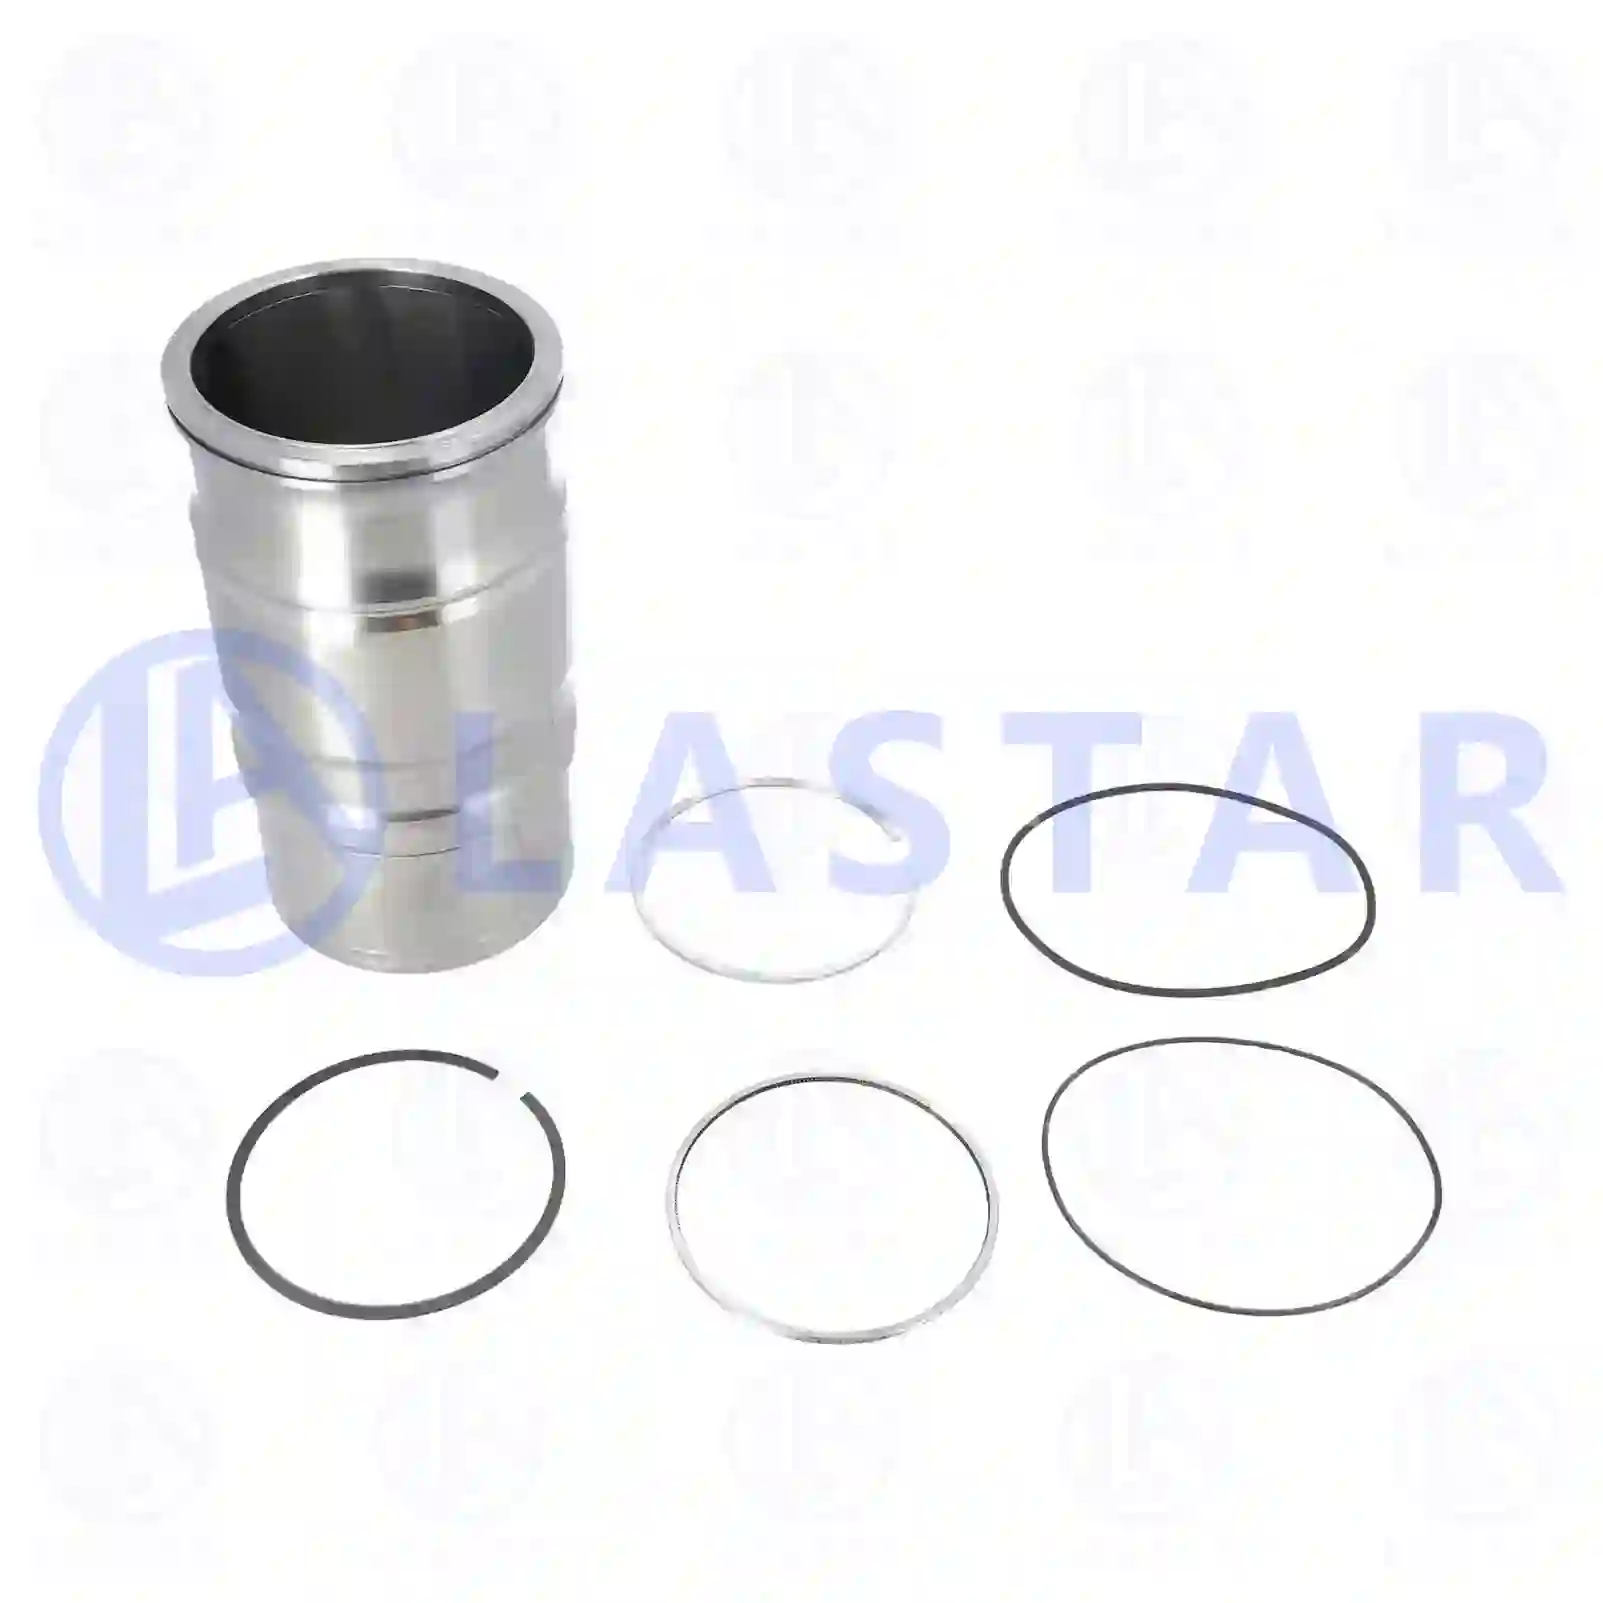 Cylinder liner, with piston rings, 77703036, 1726066, 551354, , ||  77703036 Lastar Spare Part | Truck Spare Parts, Auotomotive Spare Parts Cylinder liner, with piston rings, 77703036, 1726066, 551354, , ||  77703036 Lastar Spare Part | Truck Spare Parts, Auotomotive Spare Parts